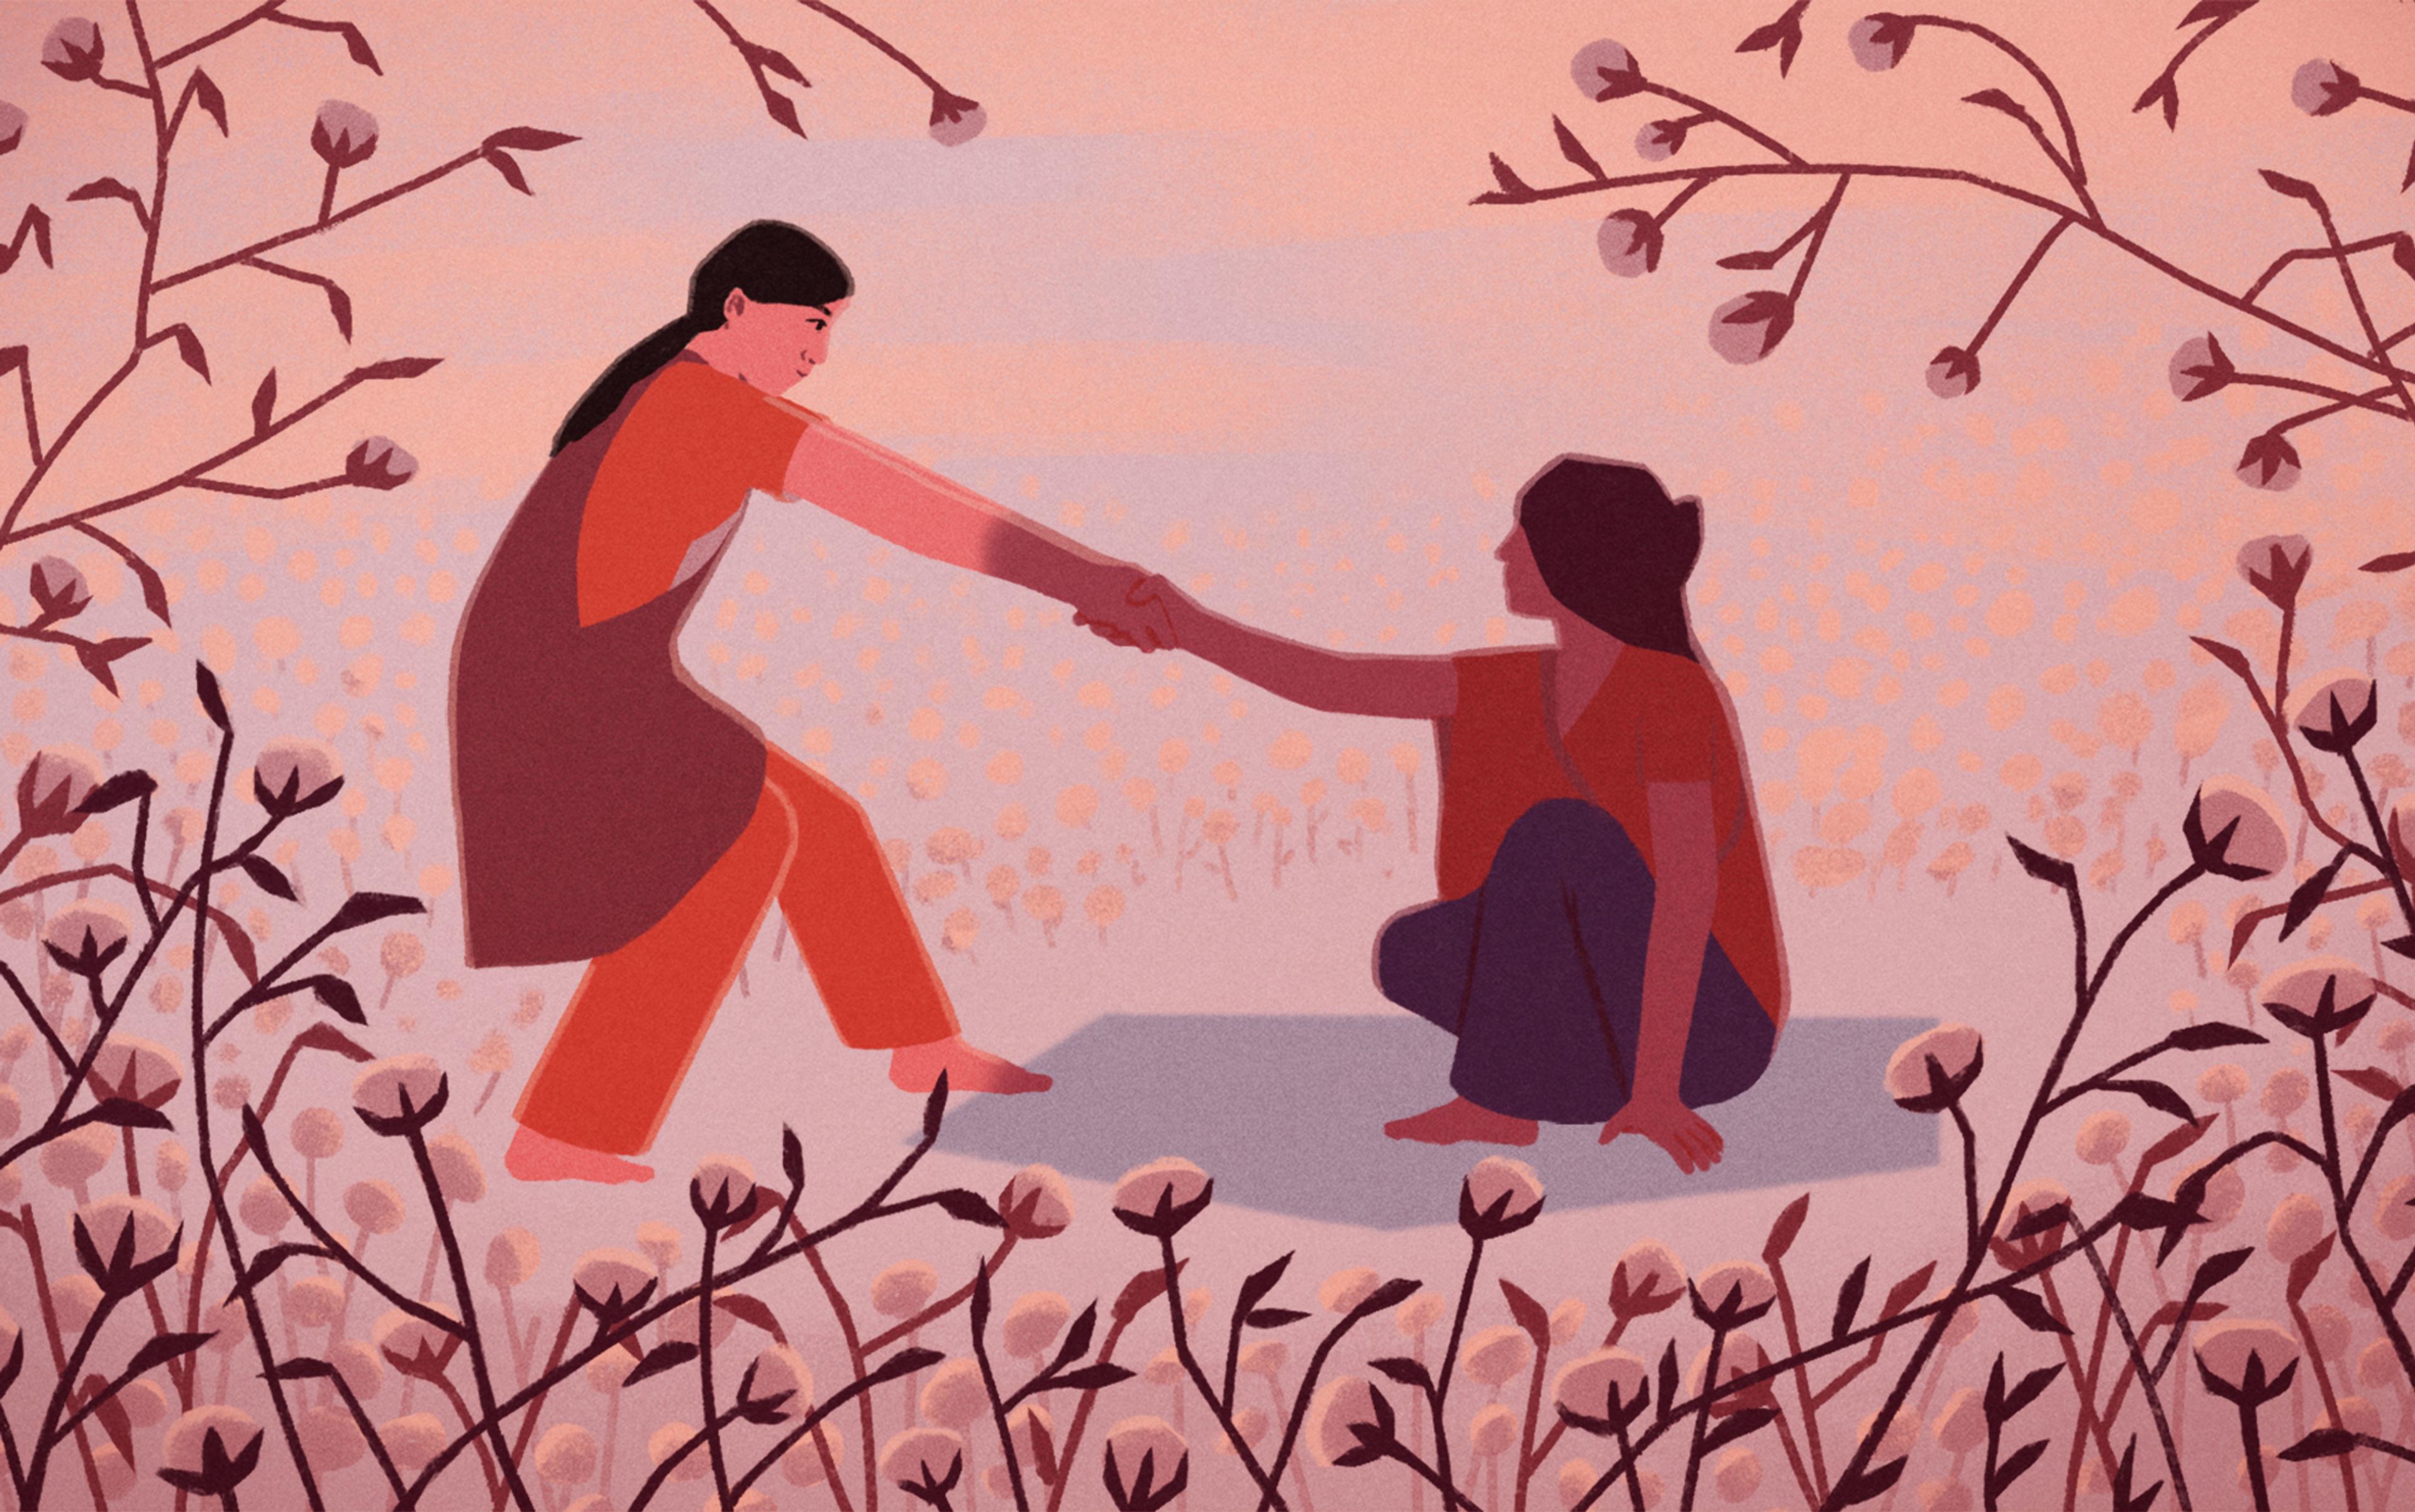 A woman helps another woman to her feet in a clearing among flowers.